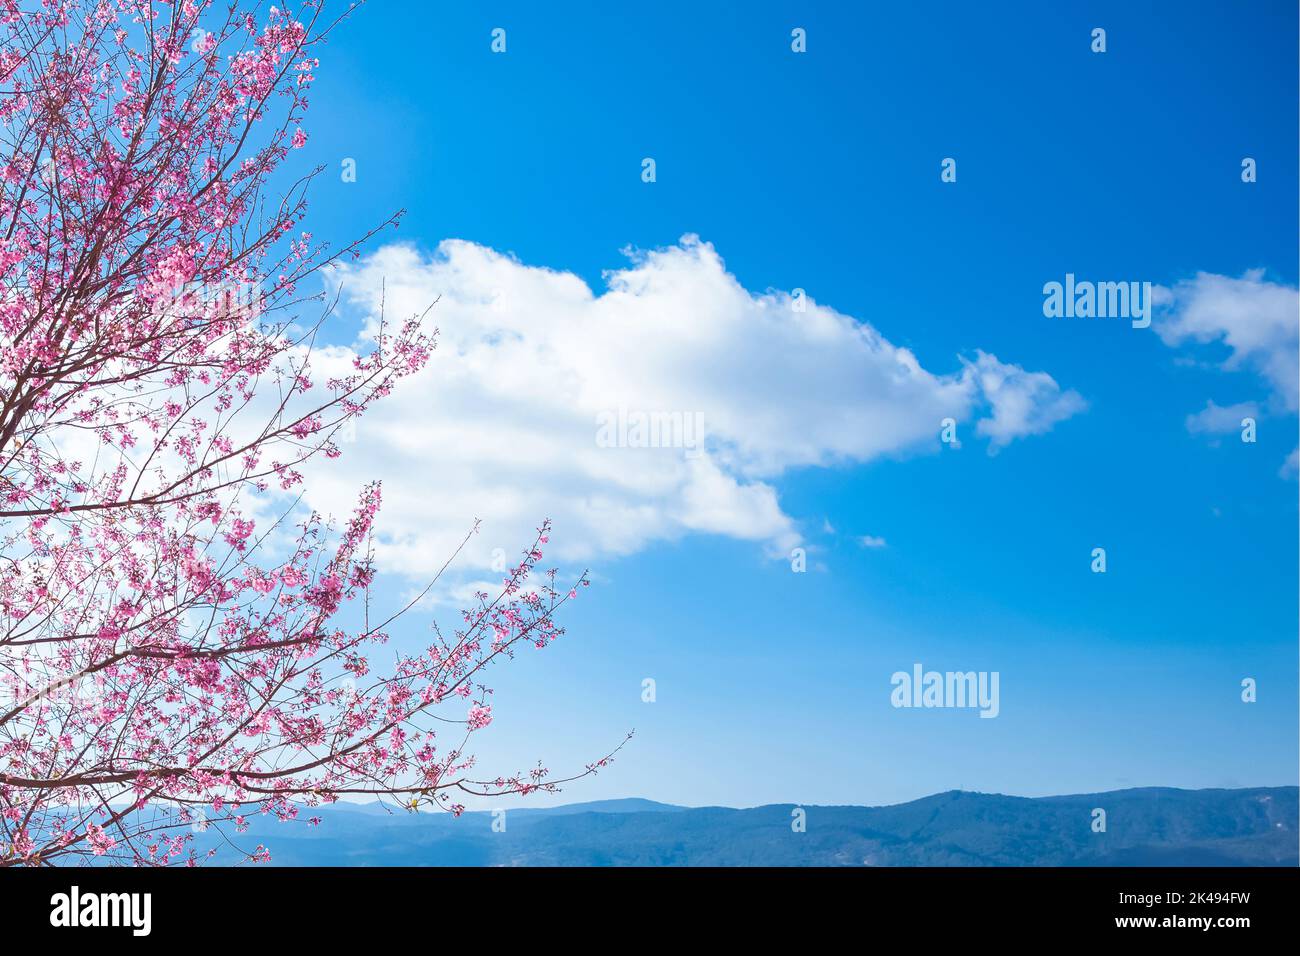 Cherry blossom, Mai Anh Dao prunus cerasoides flower in blue sky in Lac Duong, Da Lat, Lam Dong, Viet nam, Pink blossoms on the branch with blue sky d Stock Photo